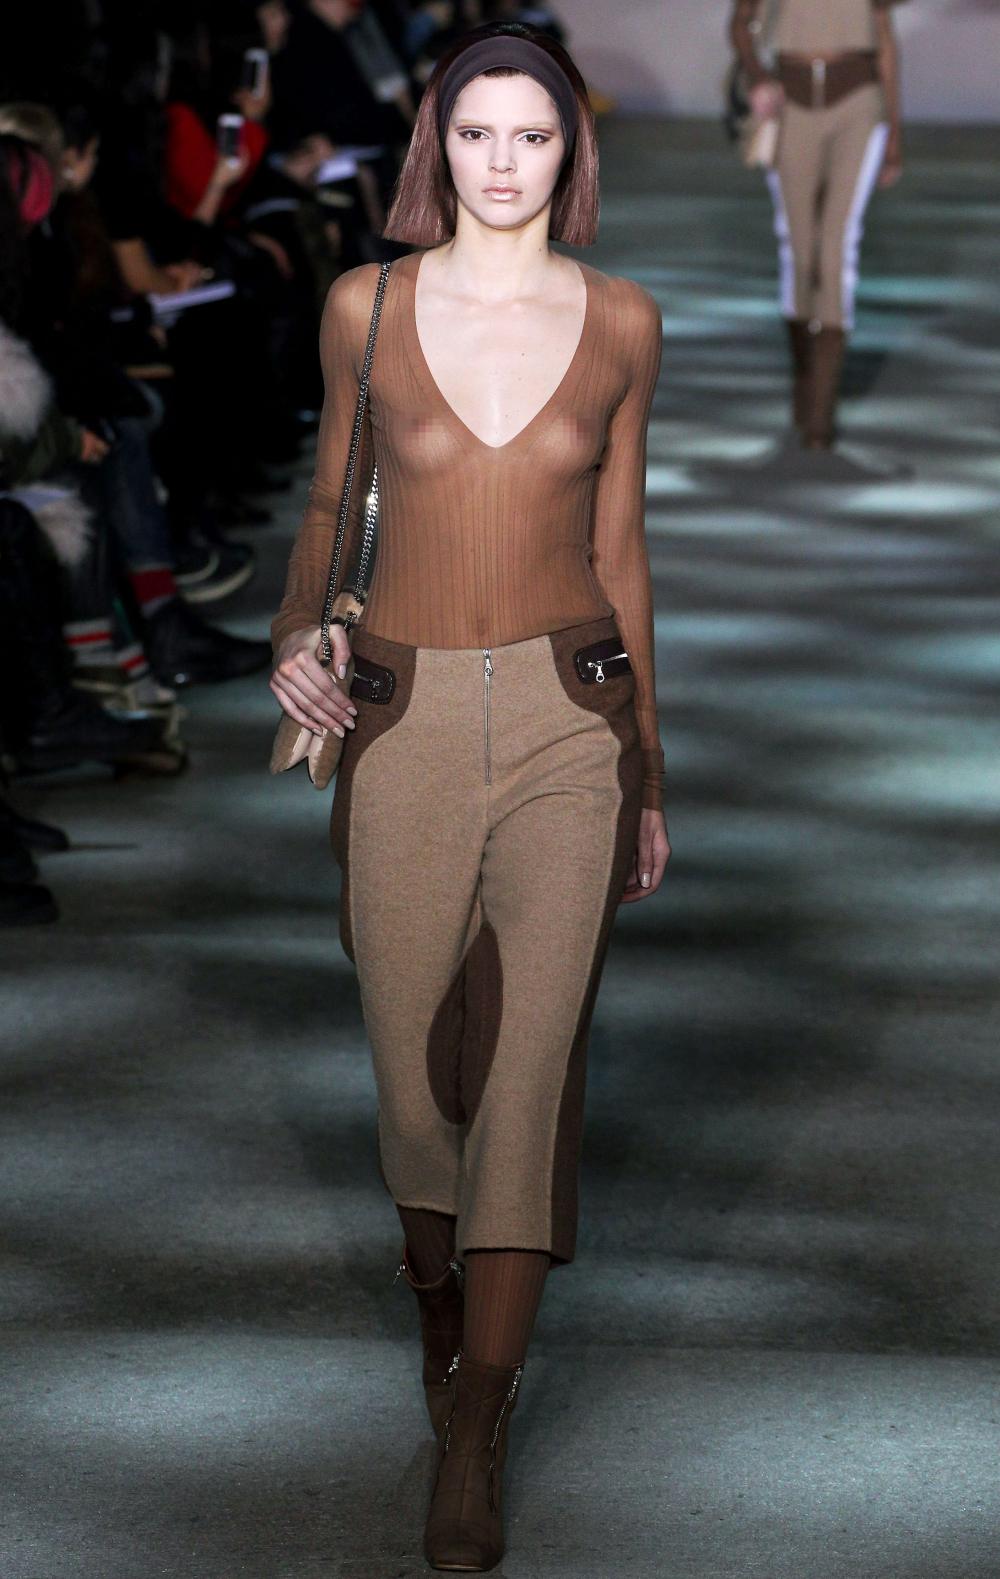 Kendall Jenner Went Topless For Her First Runway